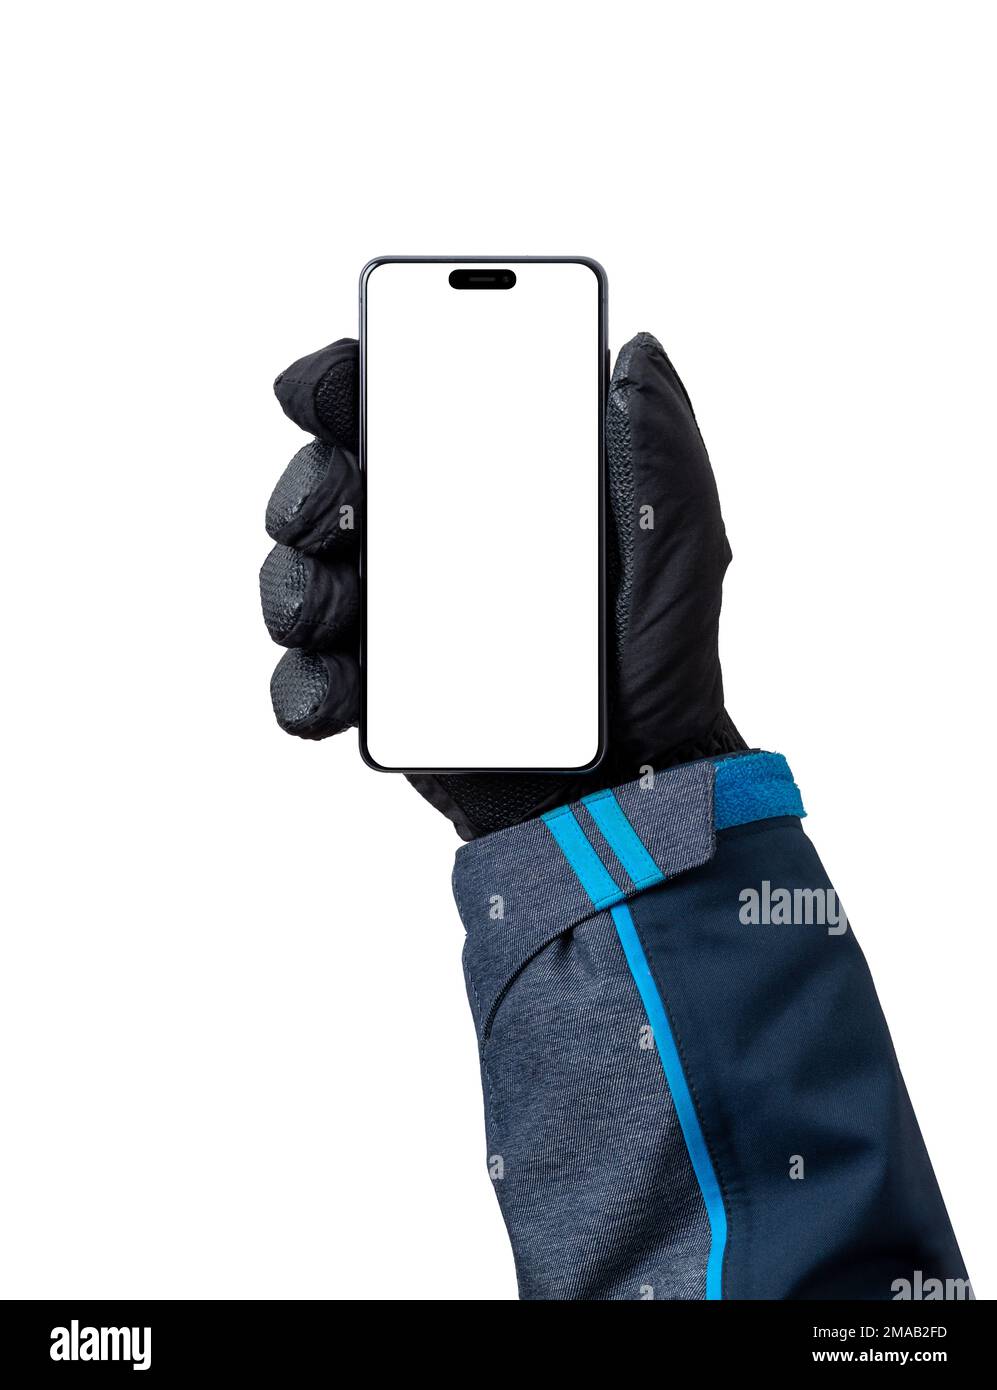 Phone mockup in man hand with glove. Isolated display for ski app promotion Stock Photo